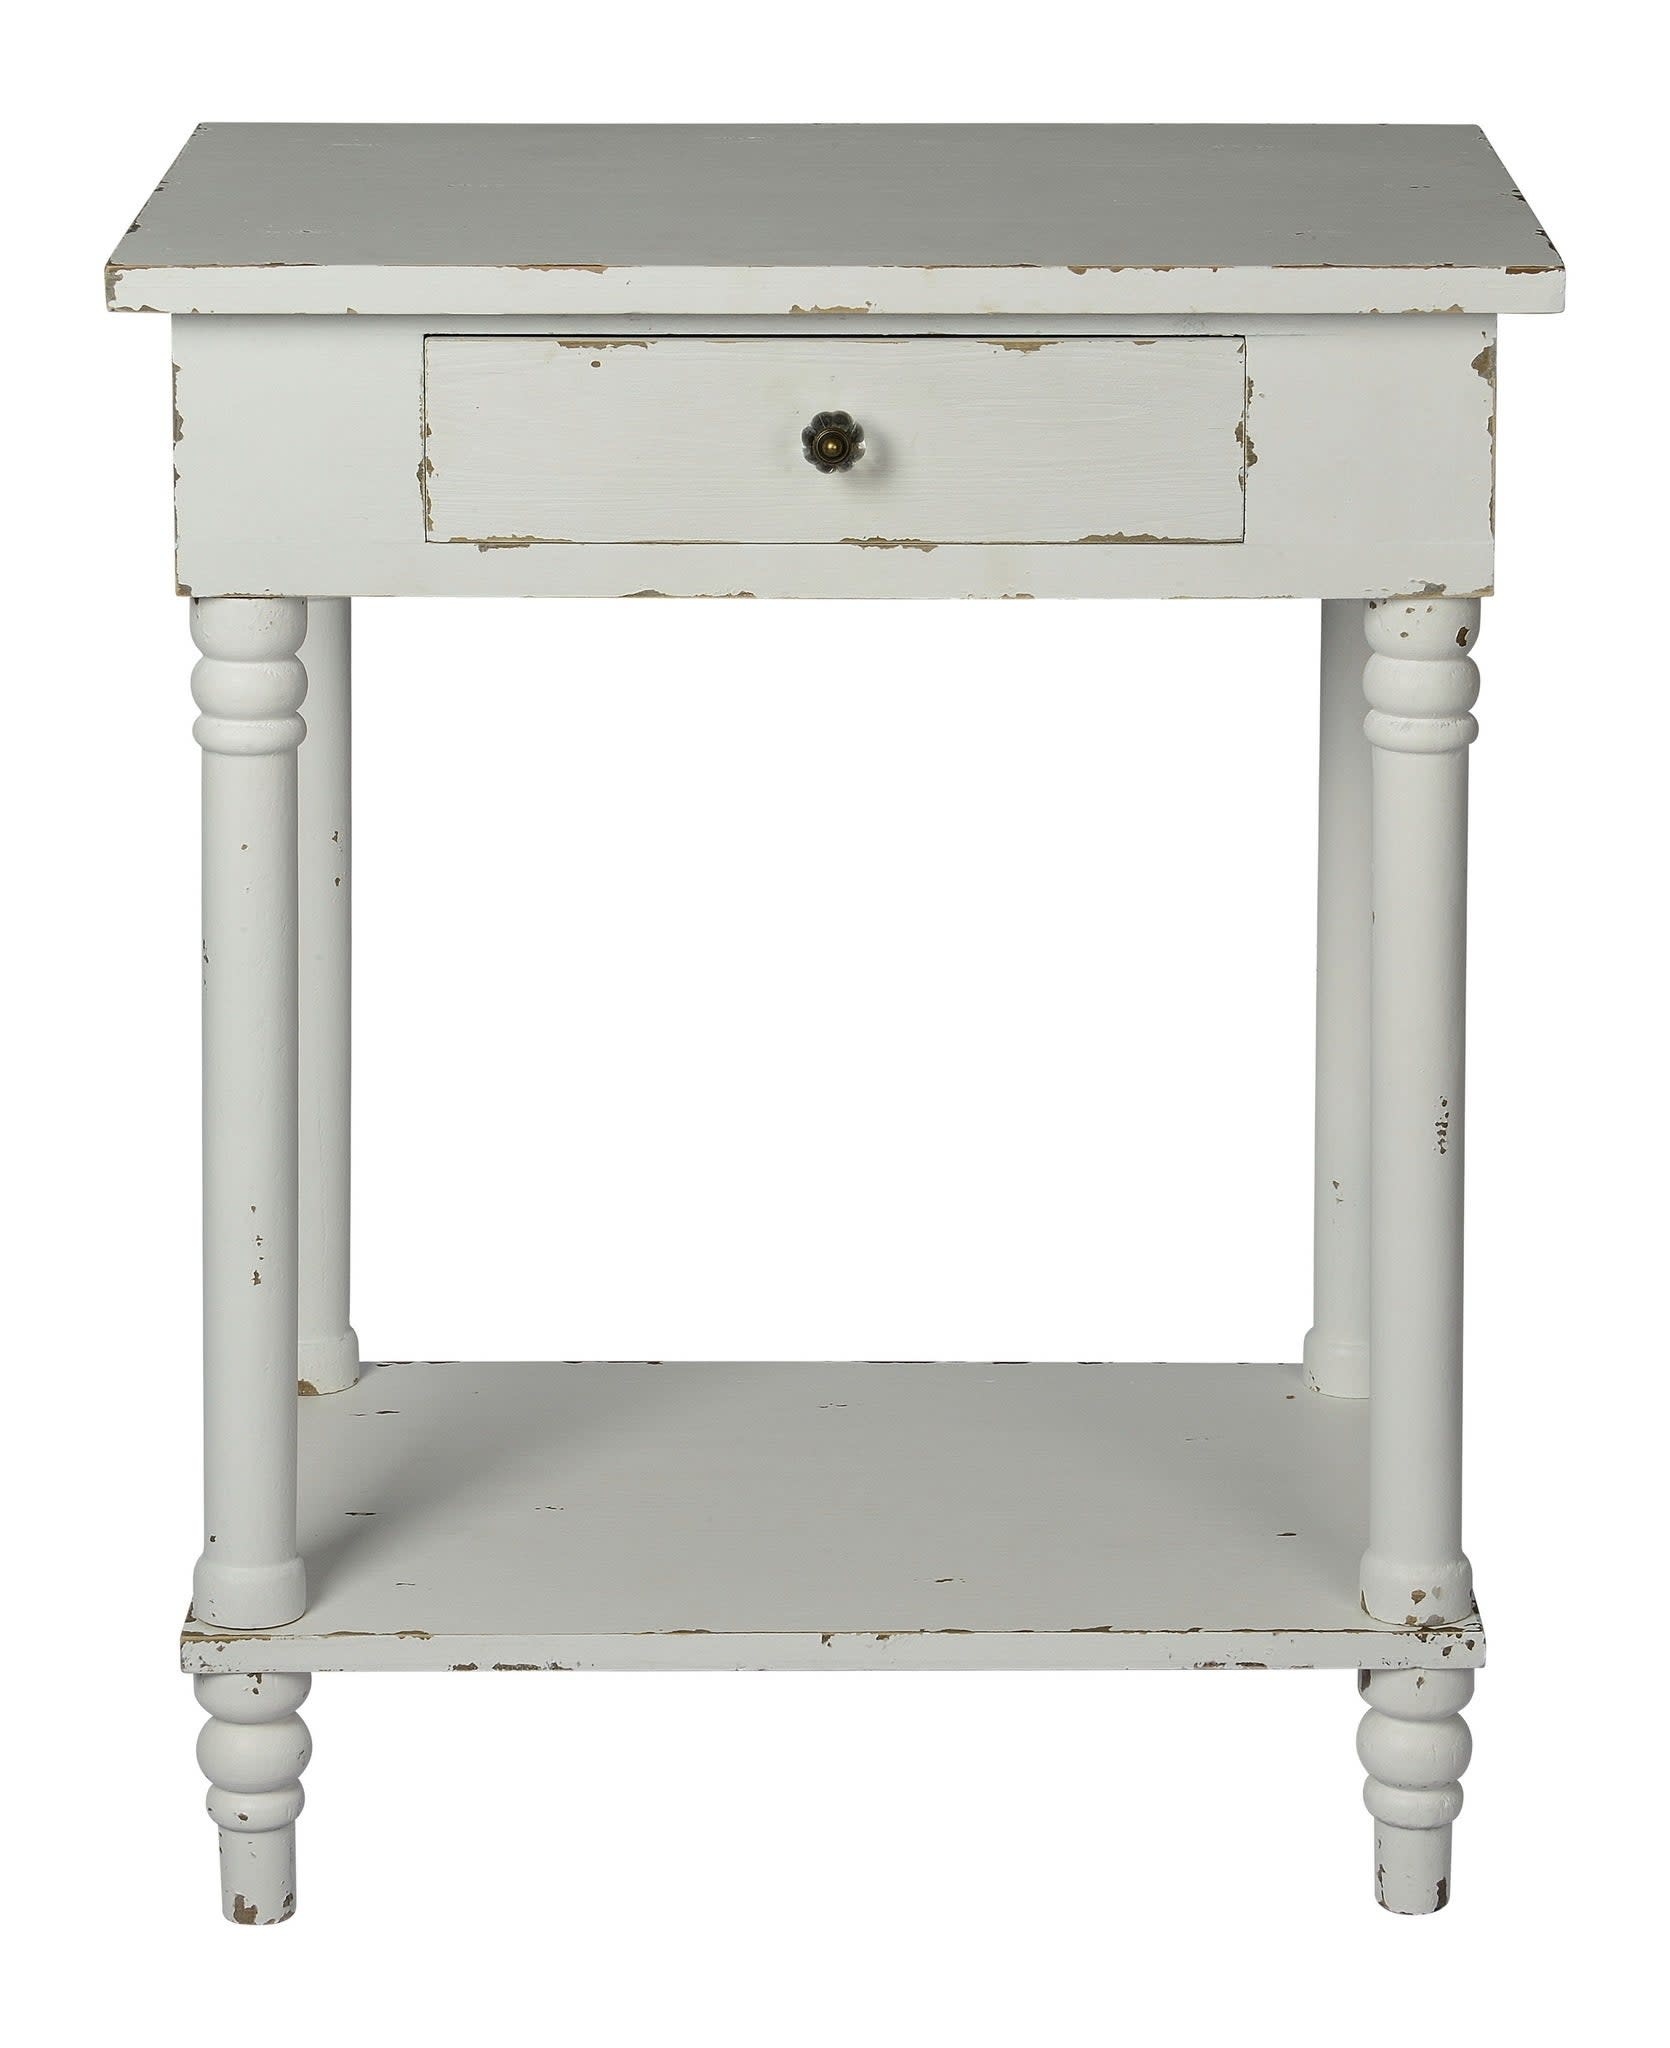 Chapel Side Table, Distressed White, 19 x 10 x 26 Furniture Available for Local Delivery or Pick Up